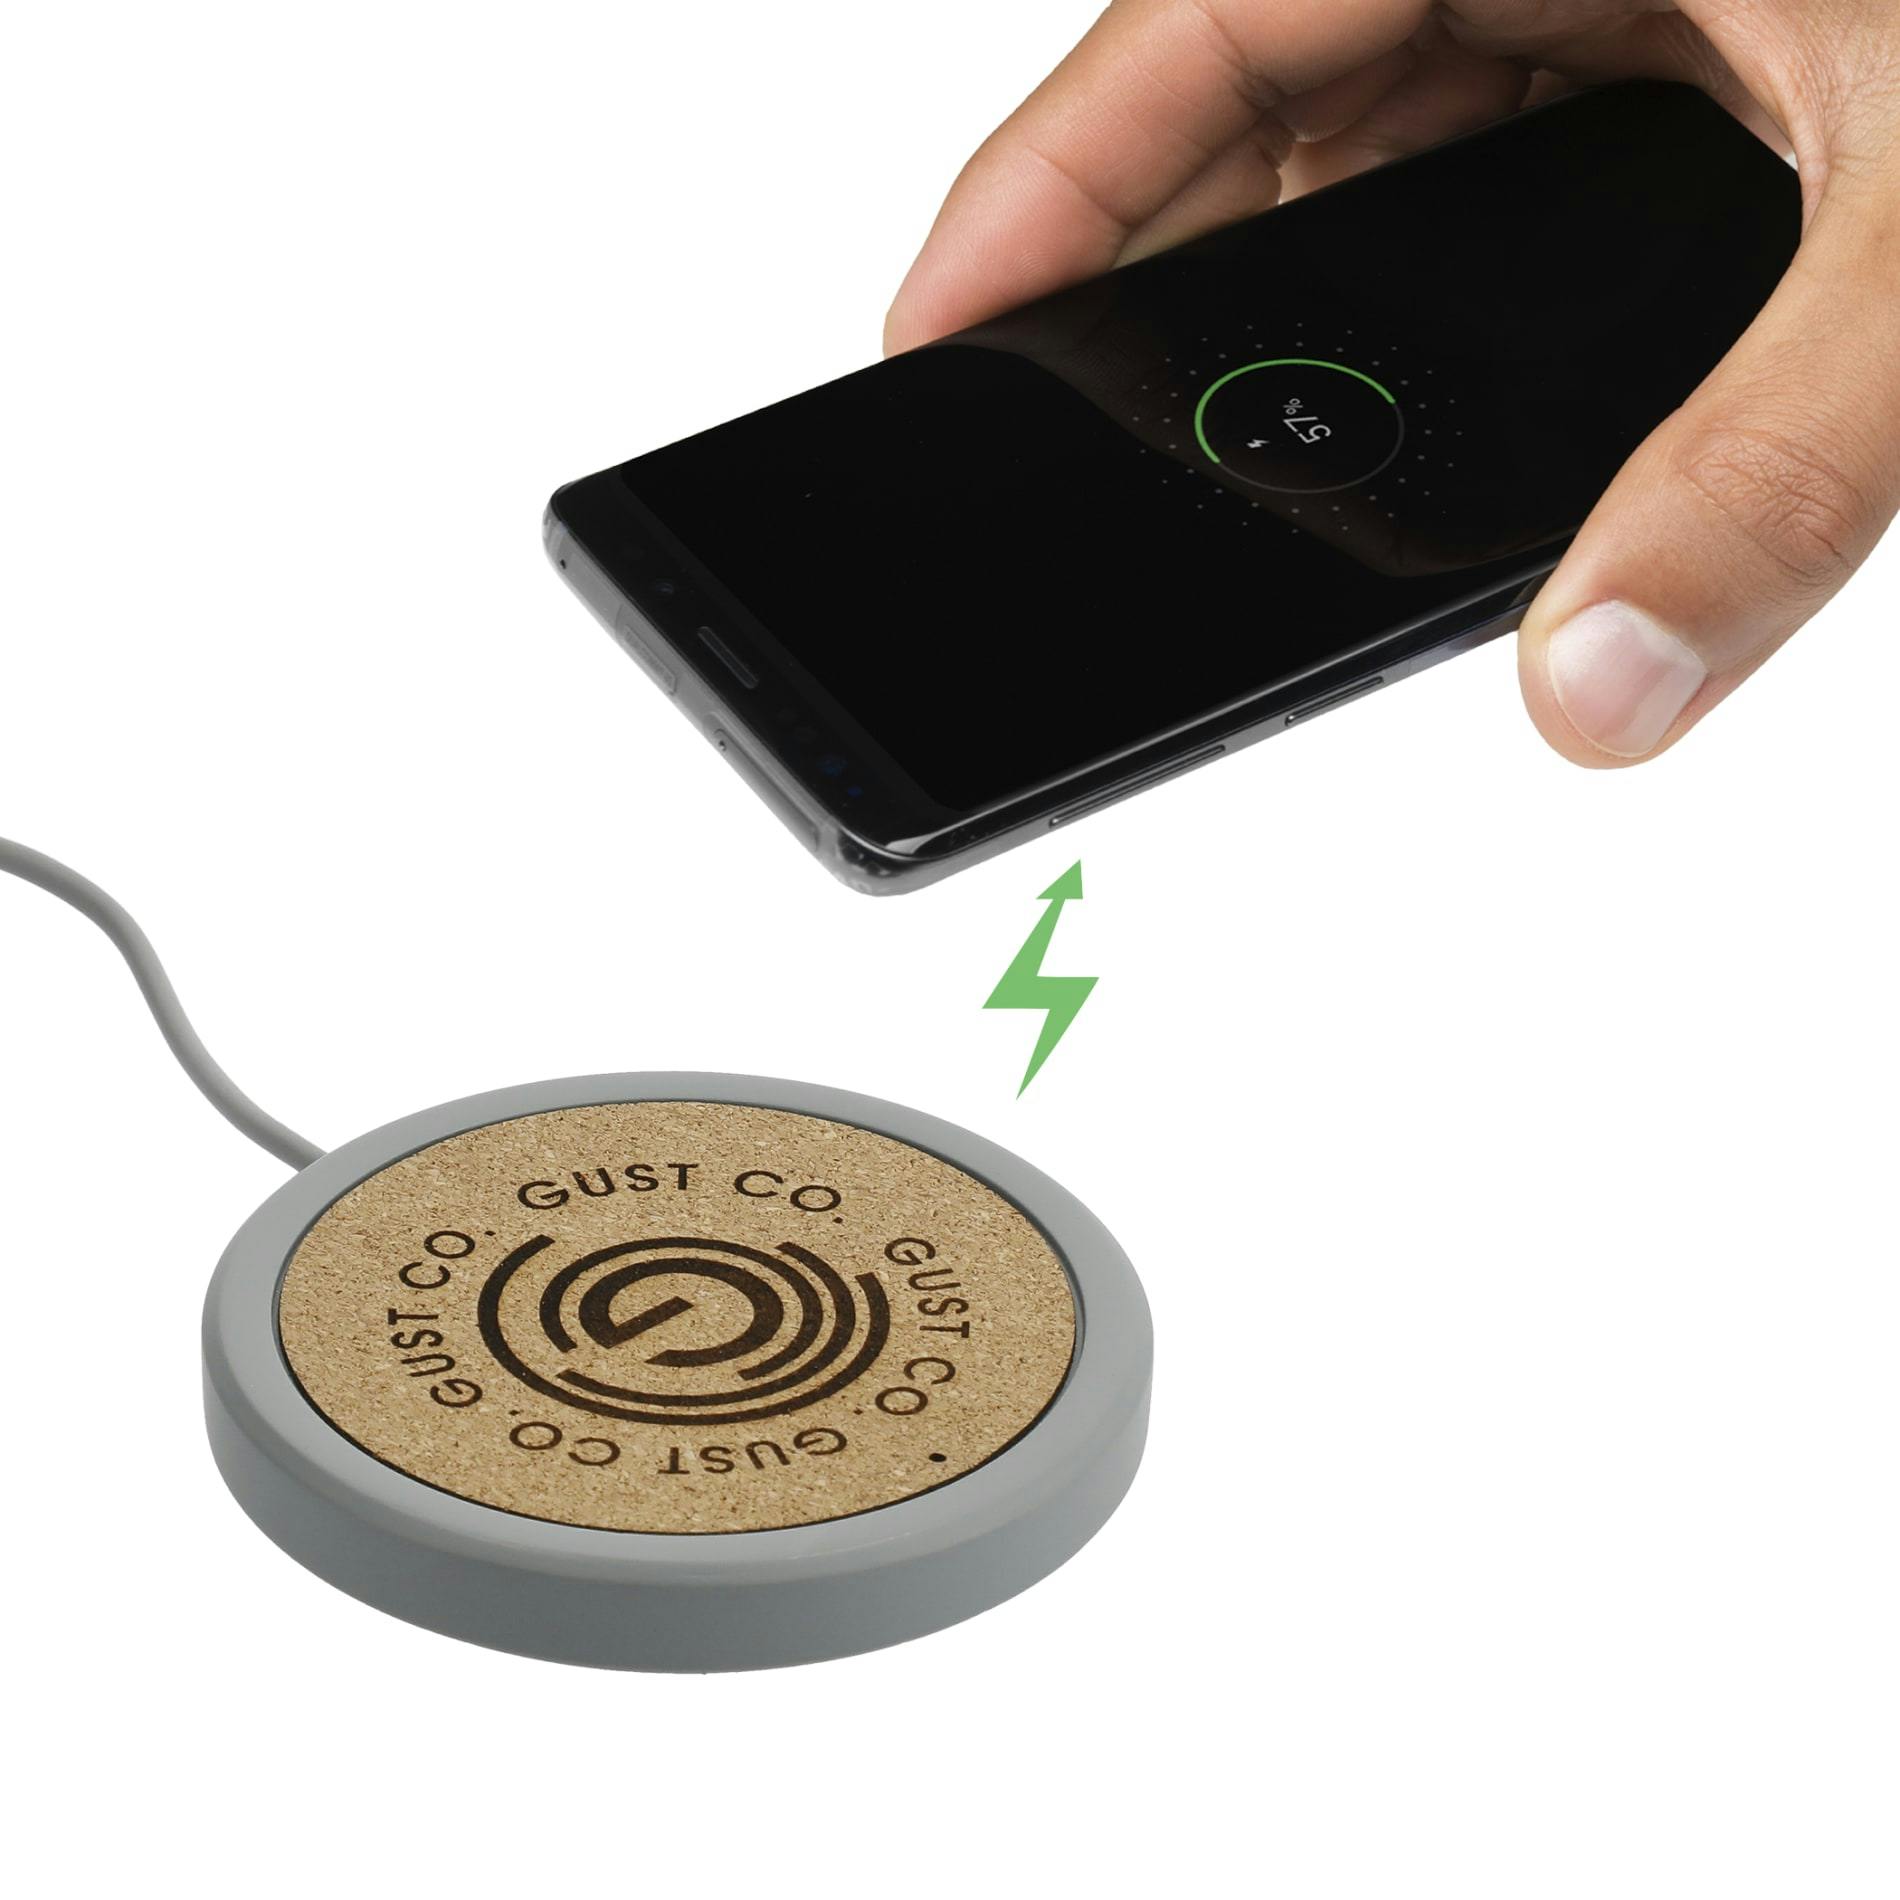 Set in Stone Fast Wireless Charging Pad - additional Image 6